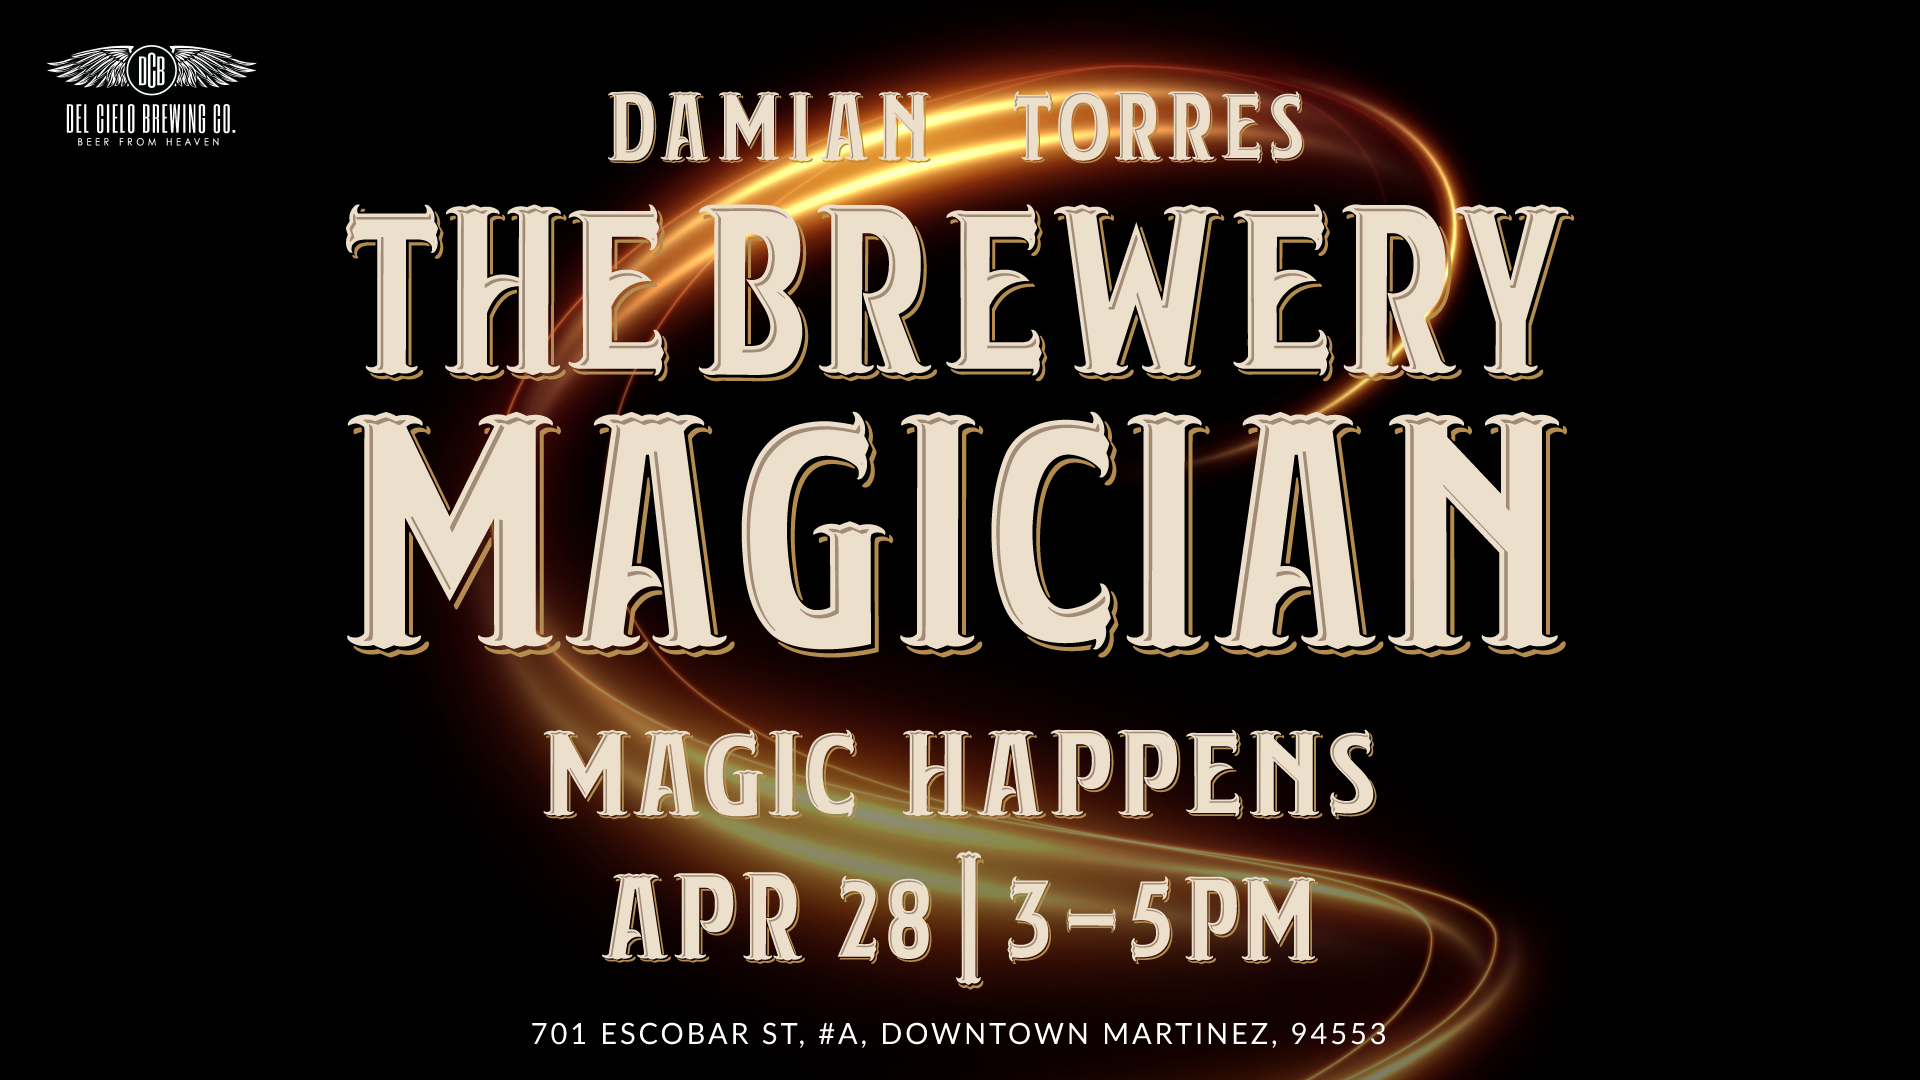 Damian torres brewery magician